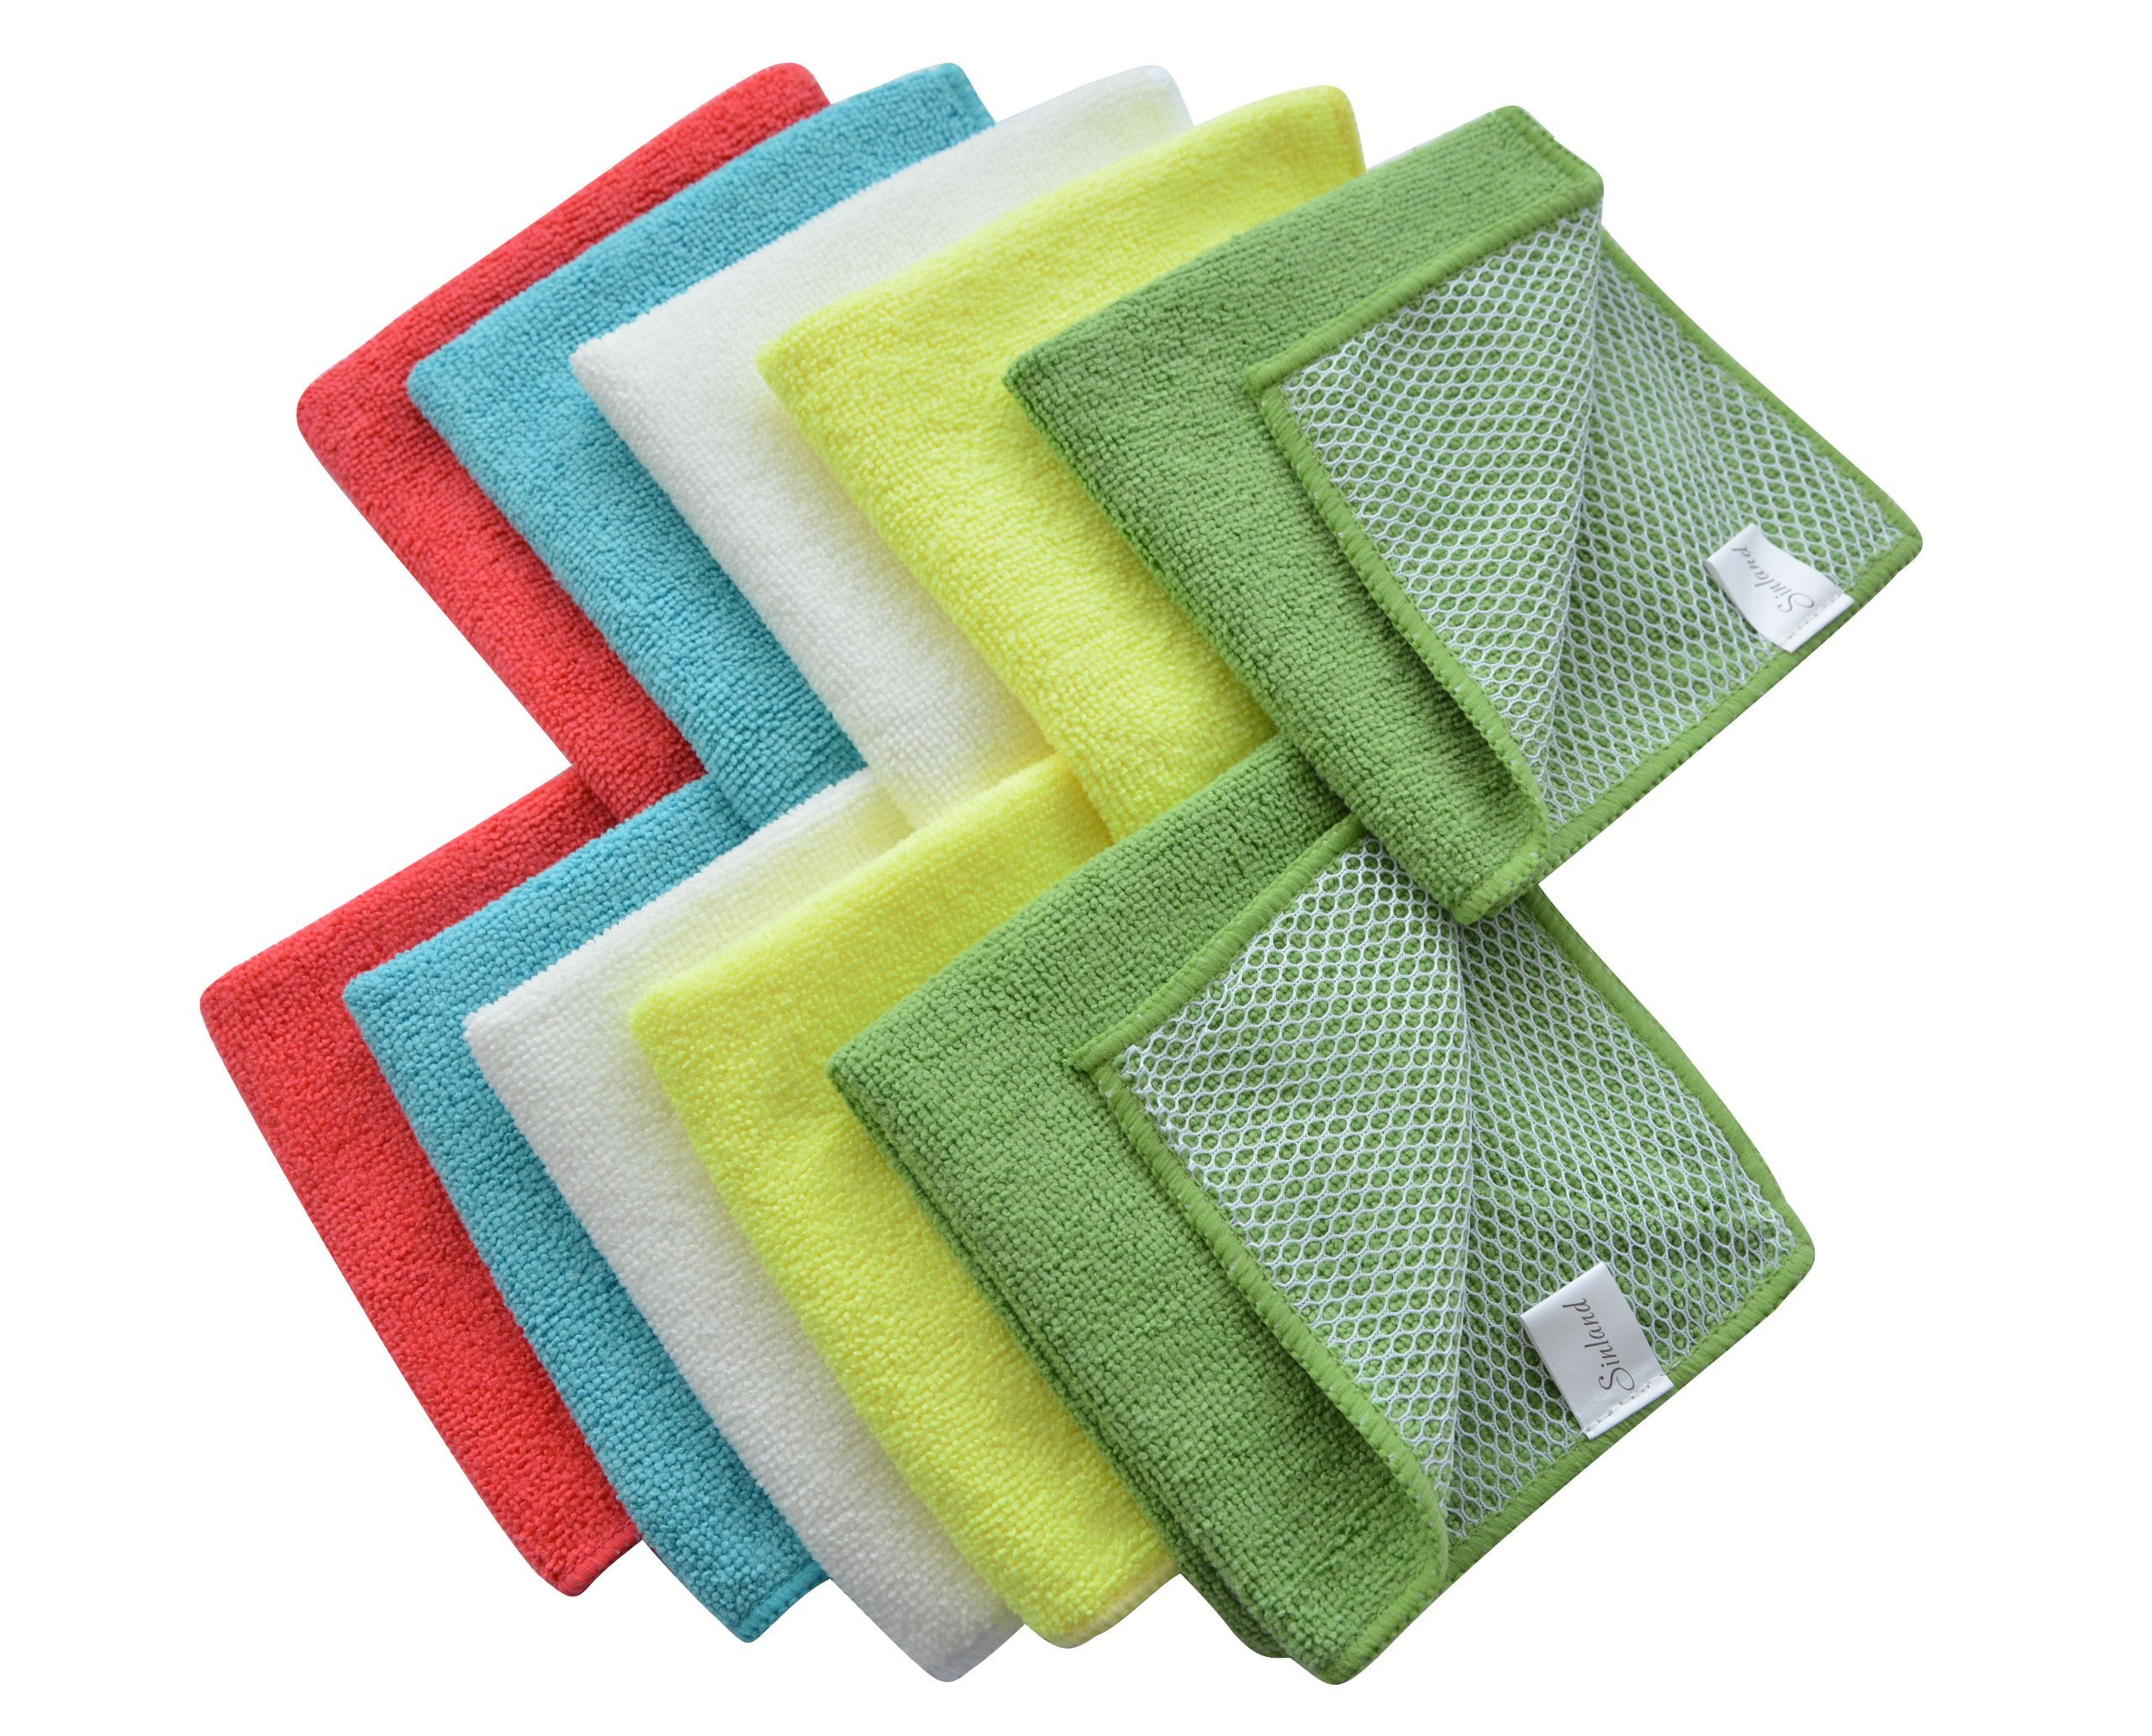 SINLAND Microfiber Dish Cloth for Washing Dishes Dish Rags Best Kitchen  Washcloth Cleaning Cloths with Poly Scour Side 5 Color Assorted  12inchx12inch